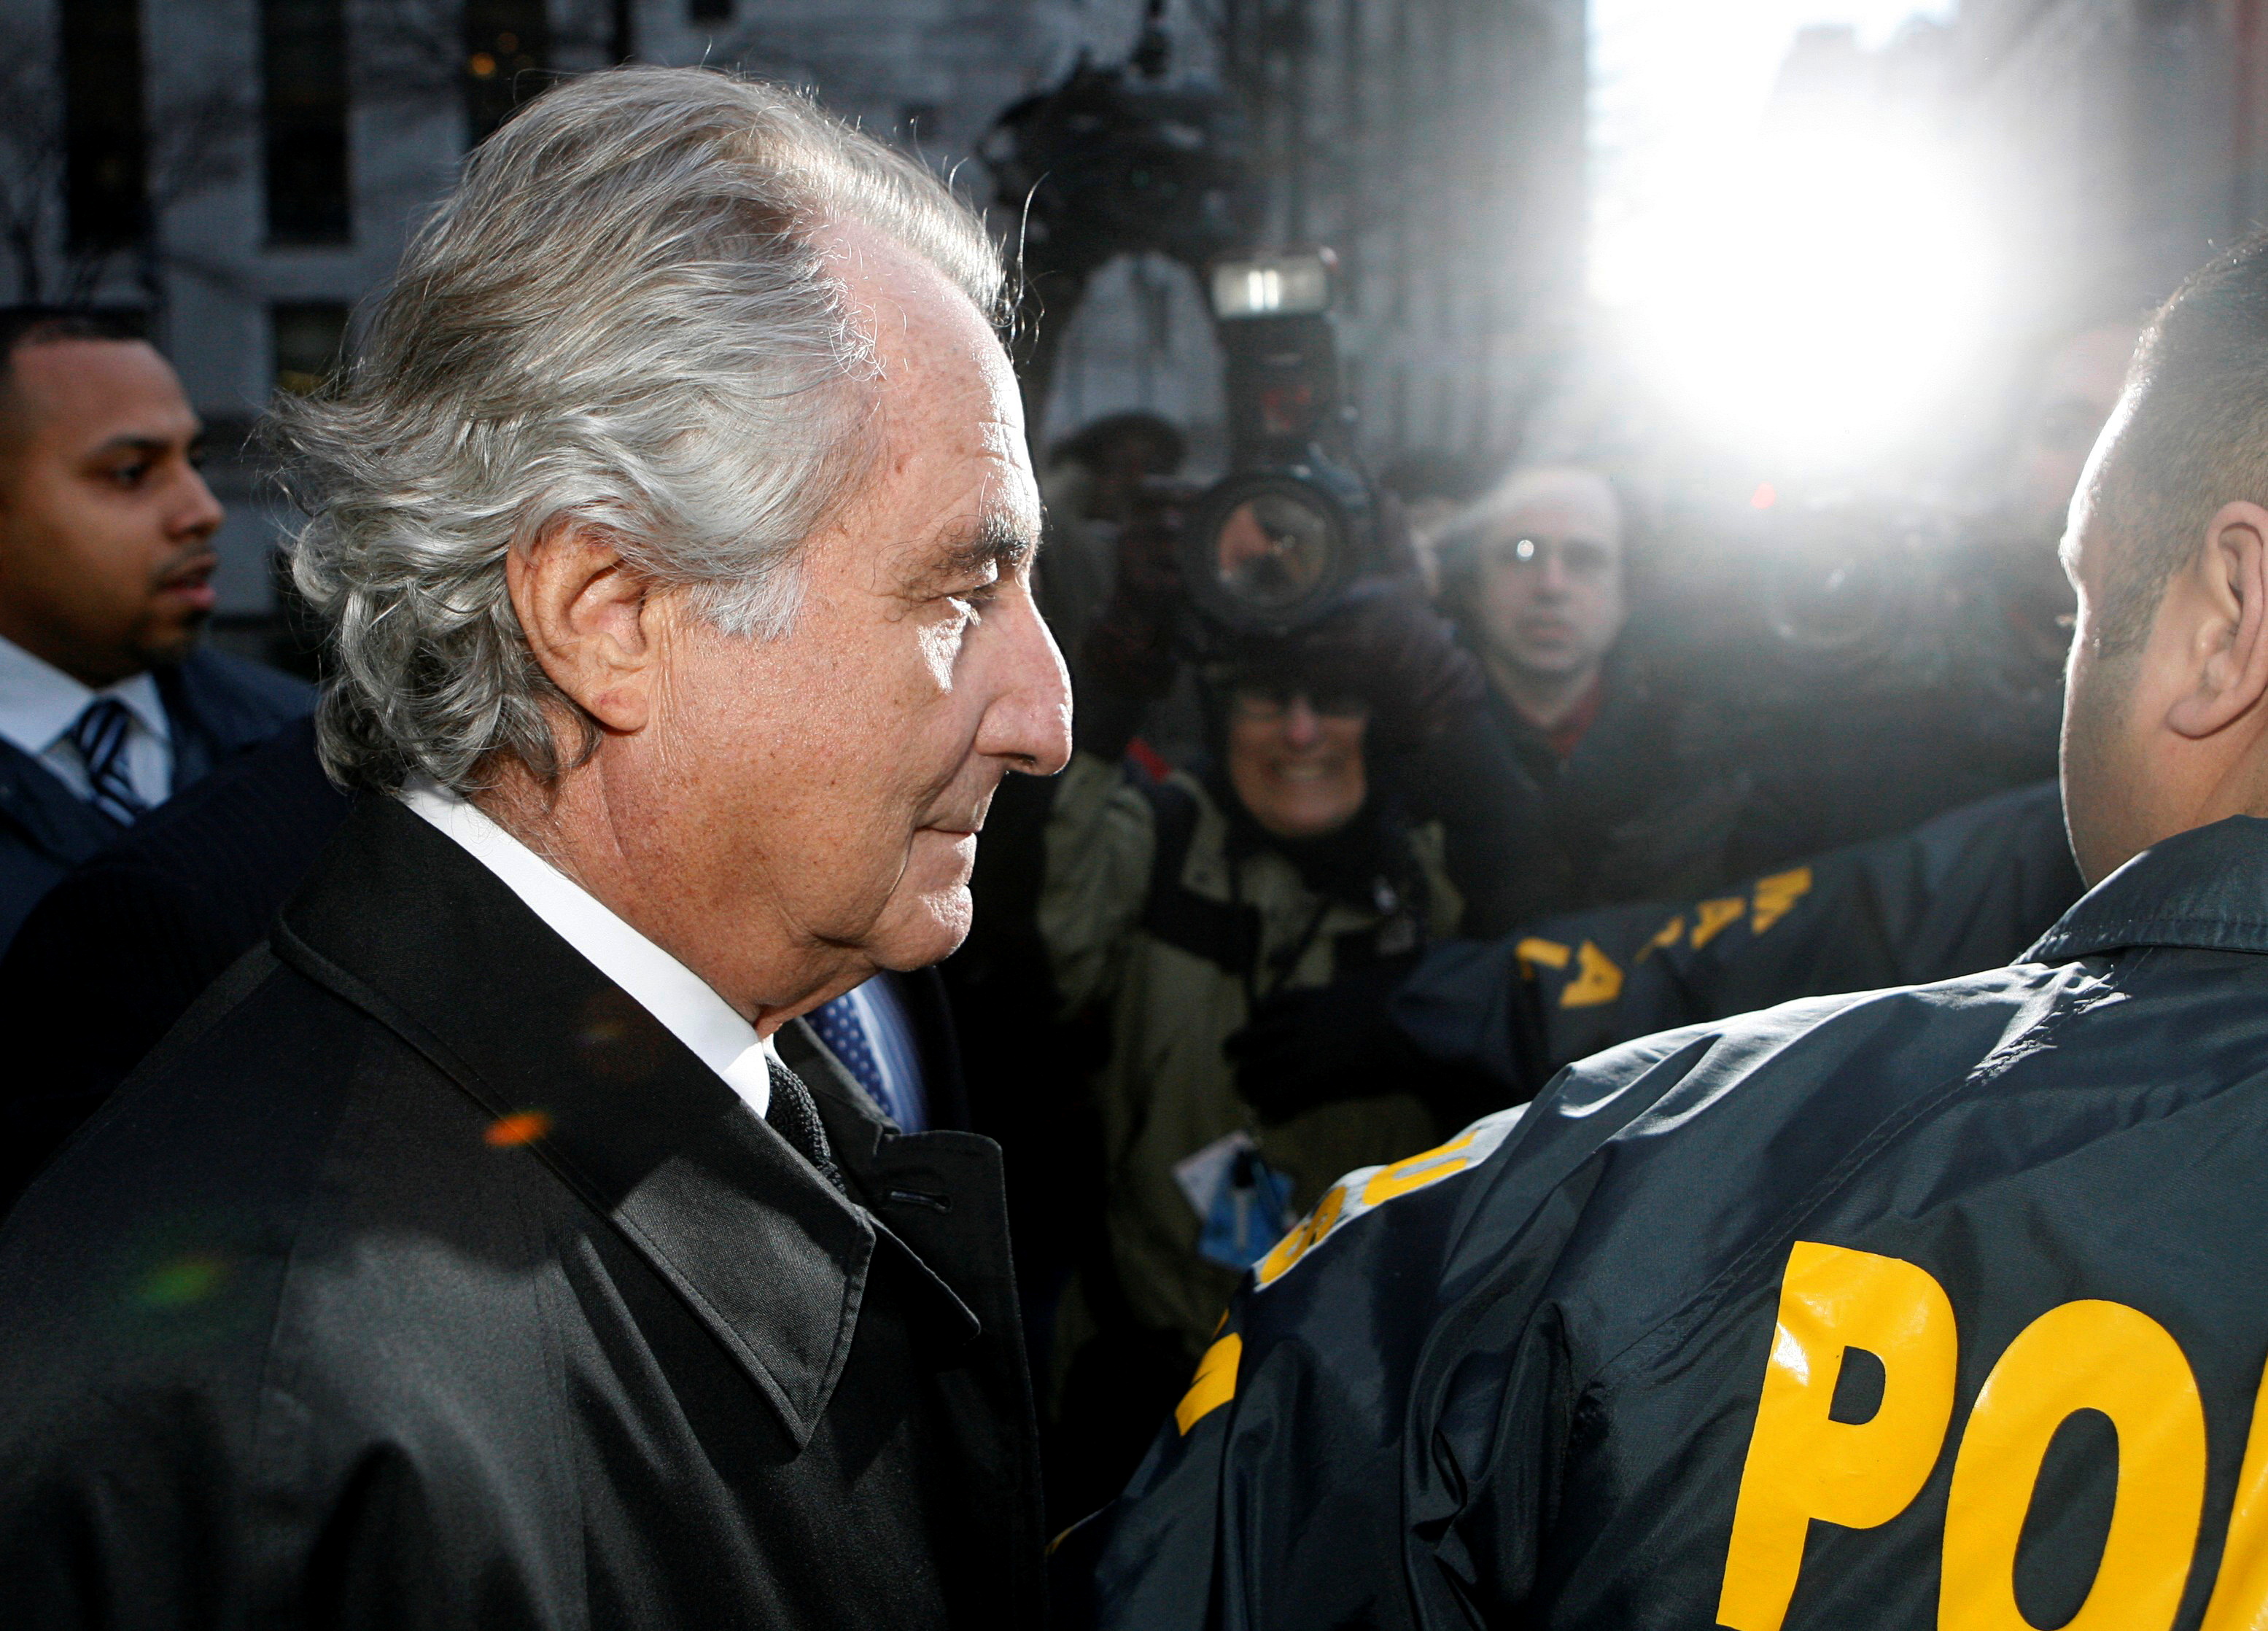 Key dates in Bernard Madoff's criminal case, recovery efforts for victims | Reuters